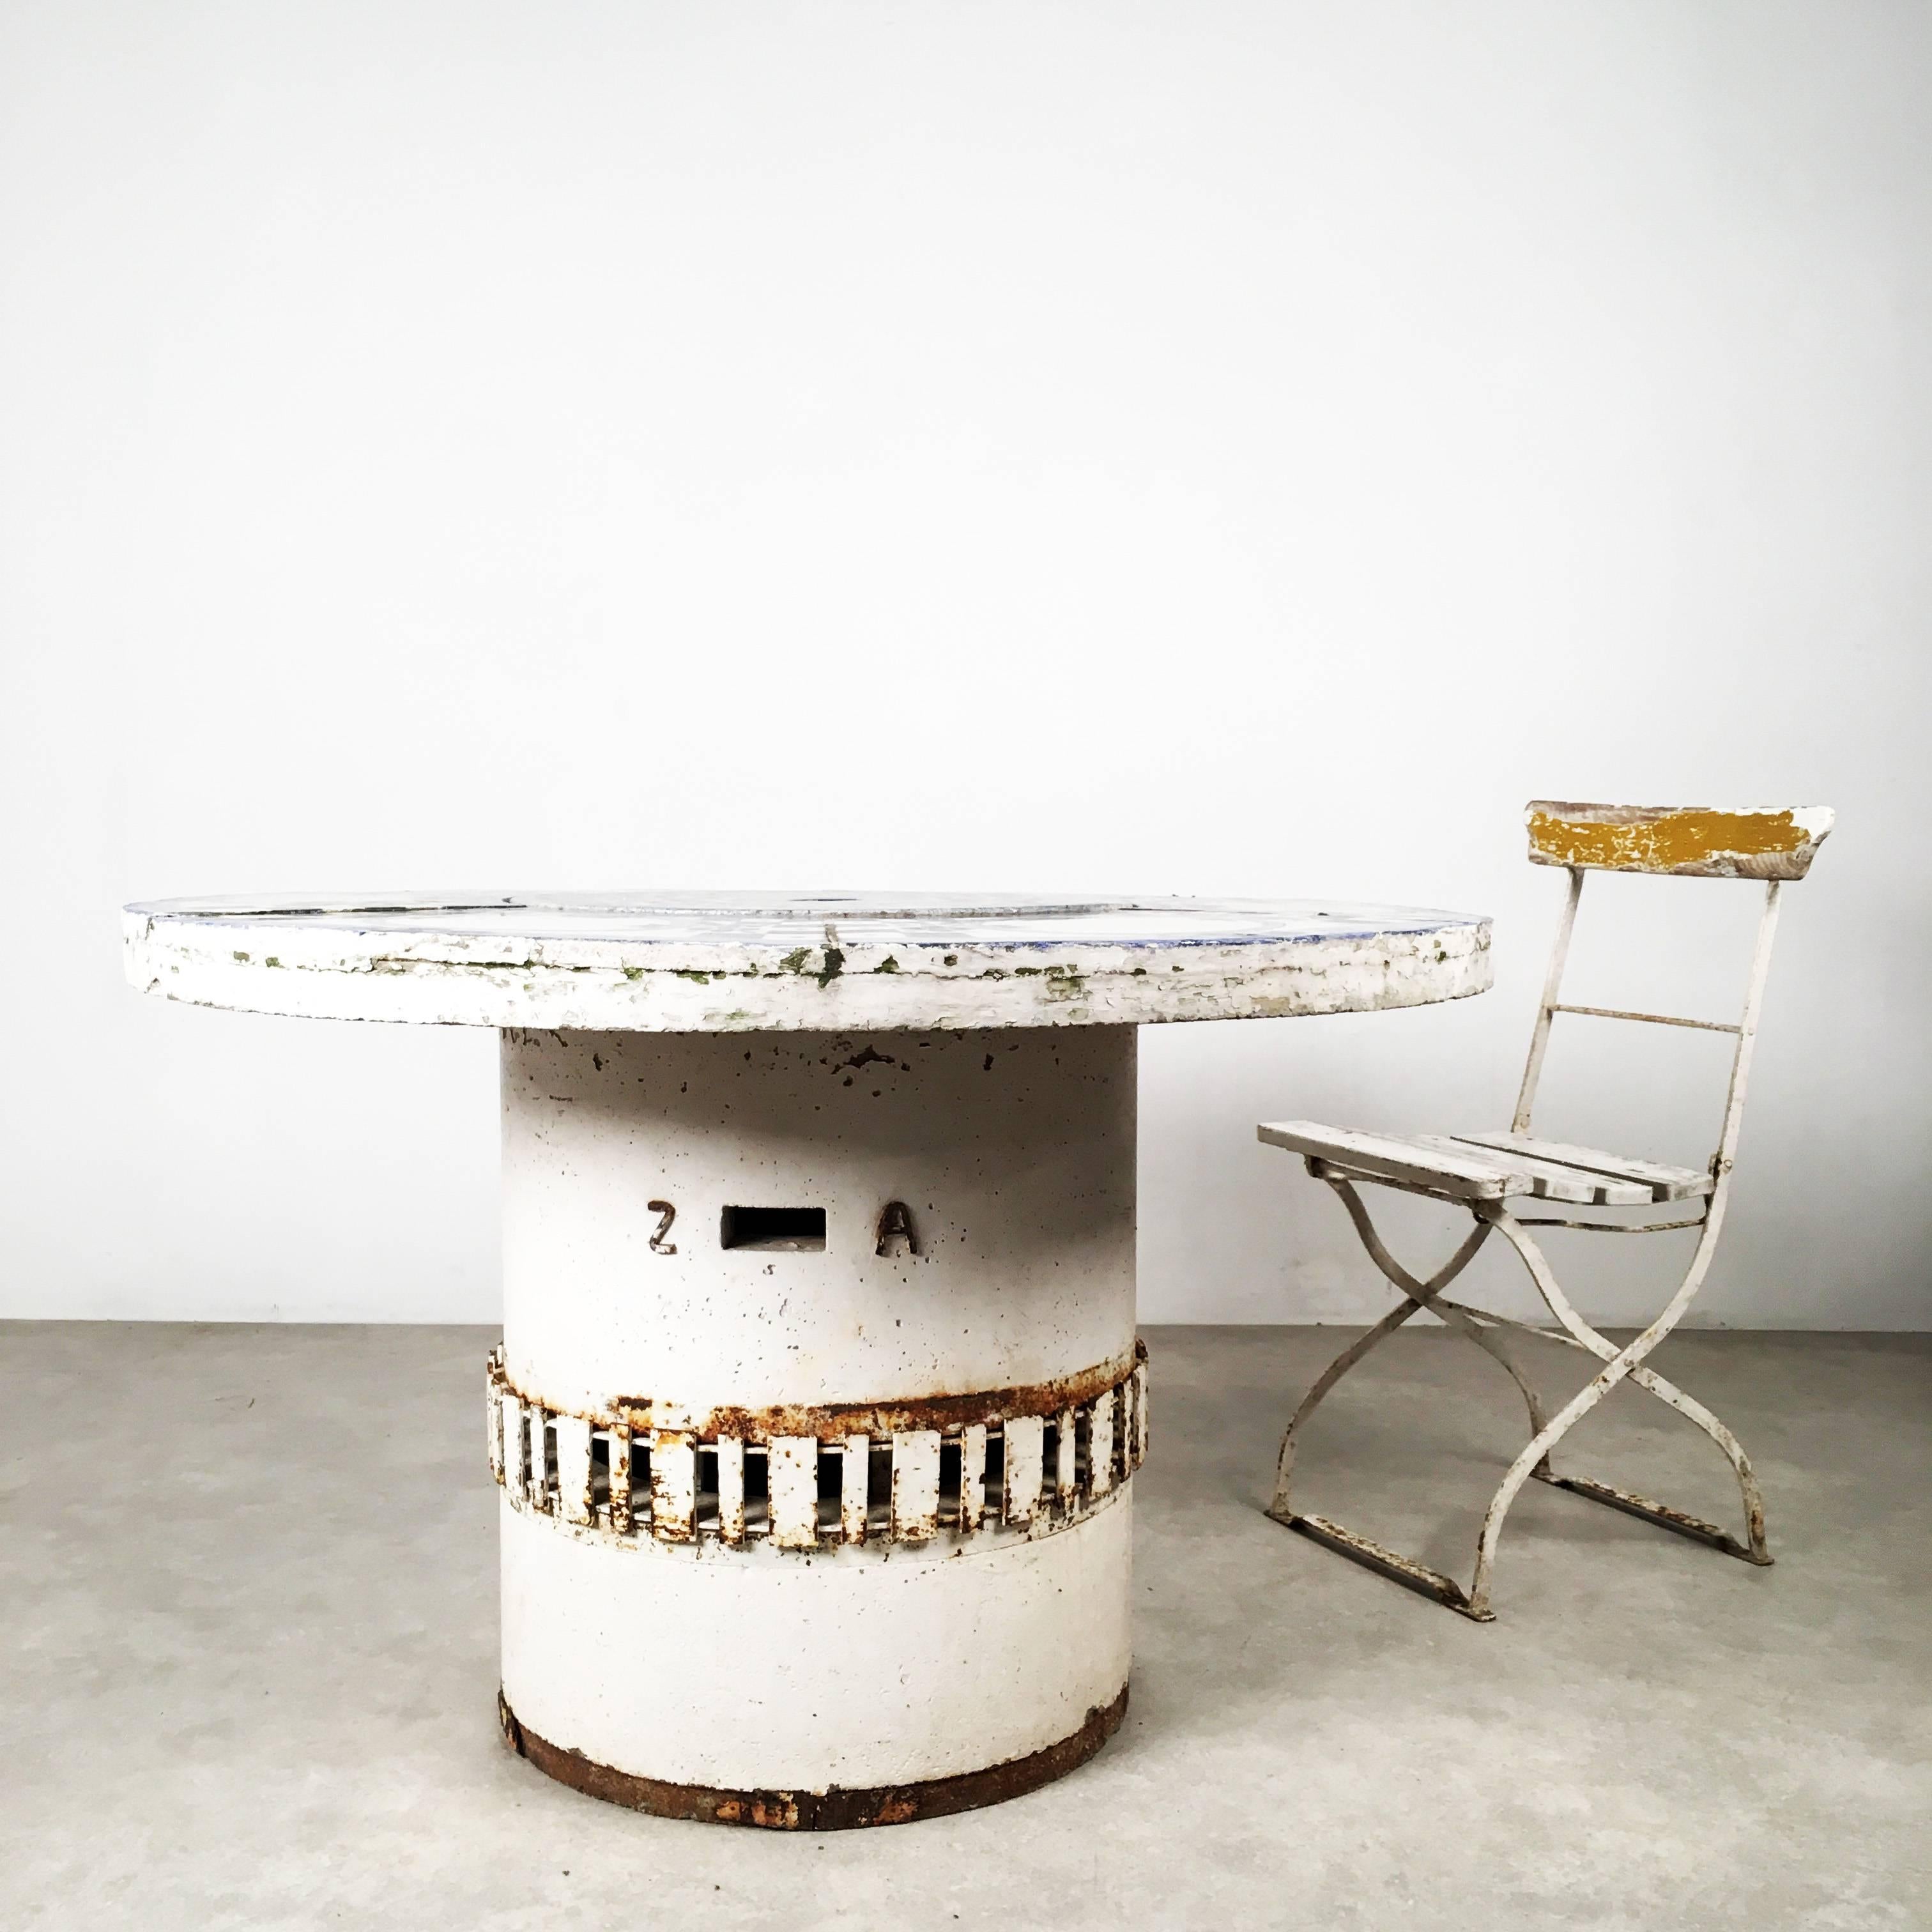 Phantastic barbecue table, made in the 1950s, most probably in Germany. The table is made for outdoor use and contains a barbecue in the middle. If not in use, the barbecue can be covered with a tile disc.

The base of the table consists of two